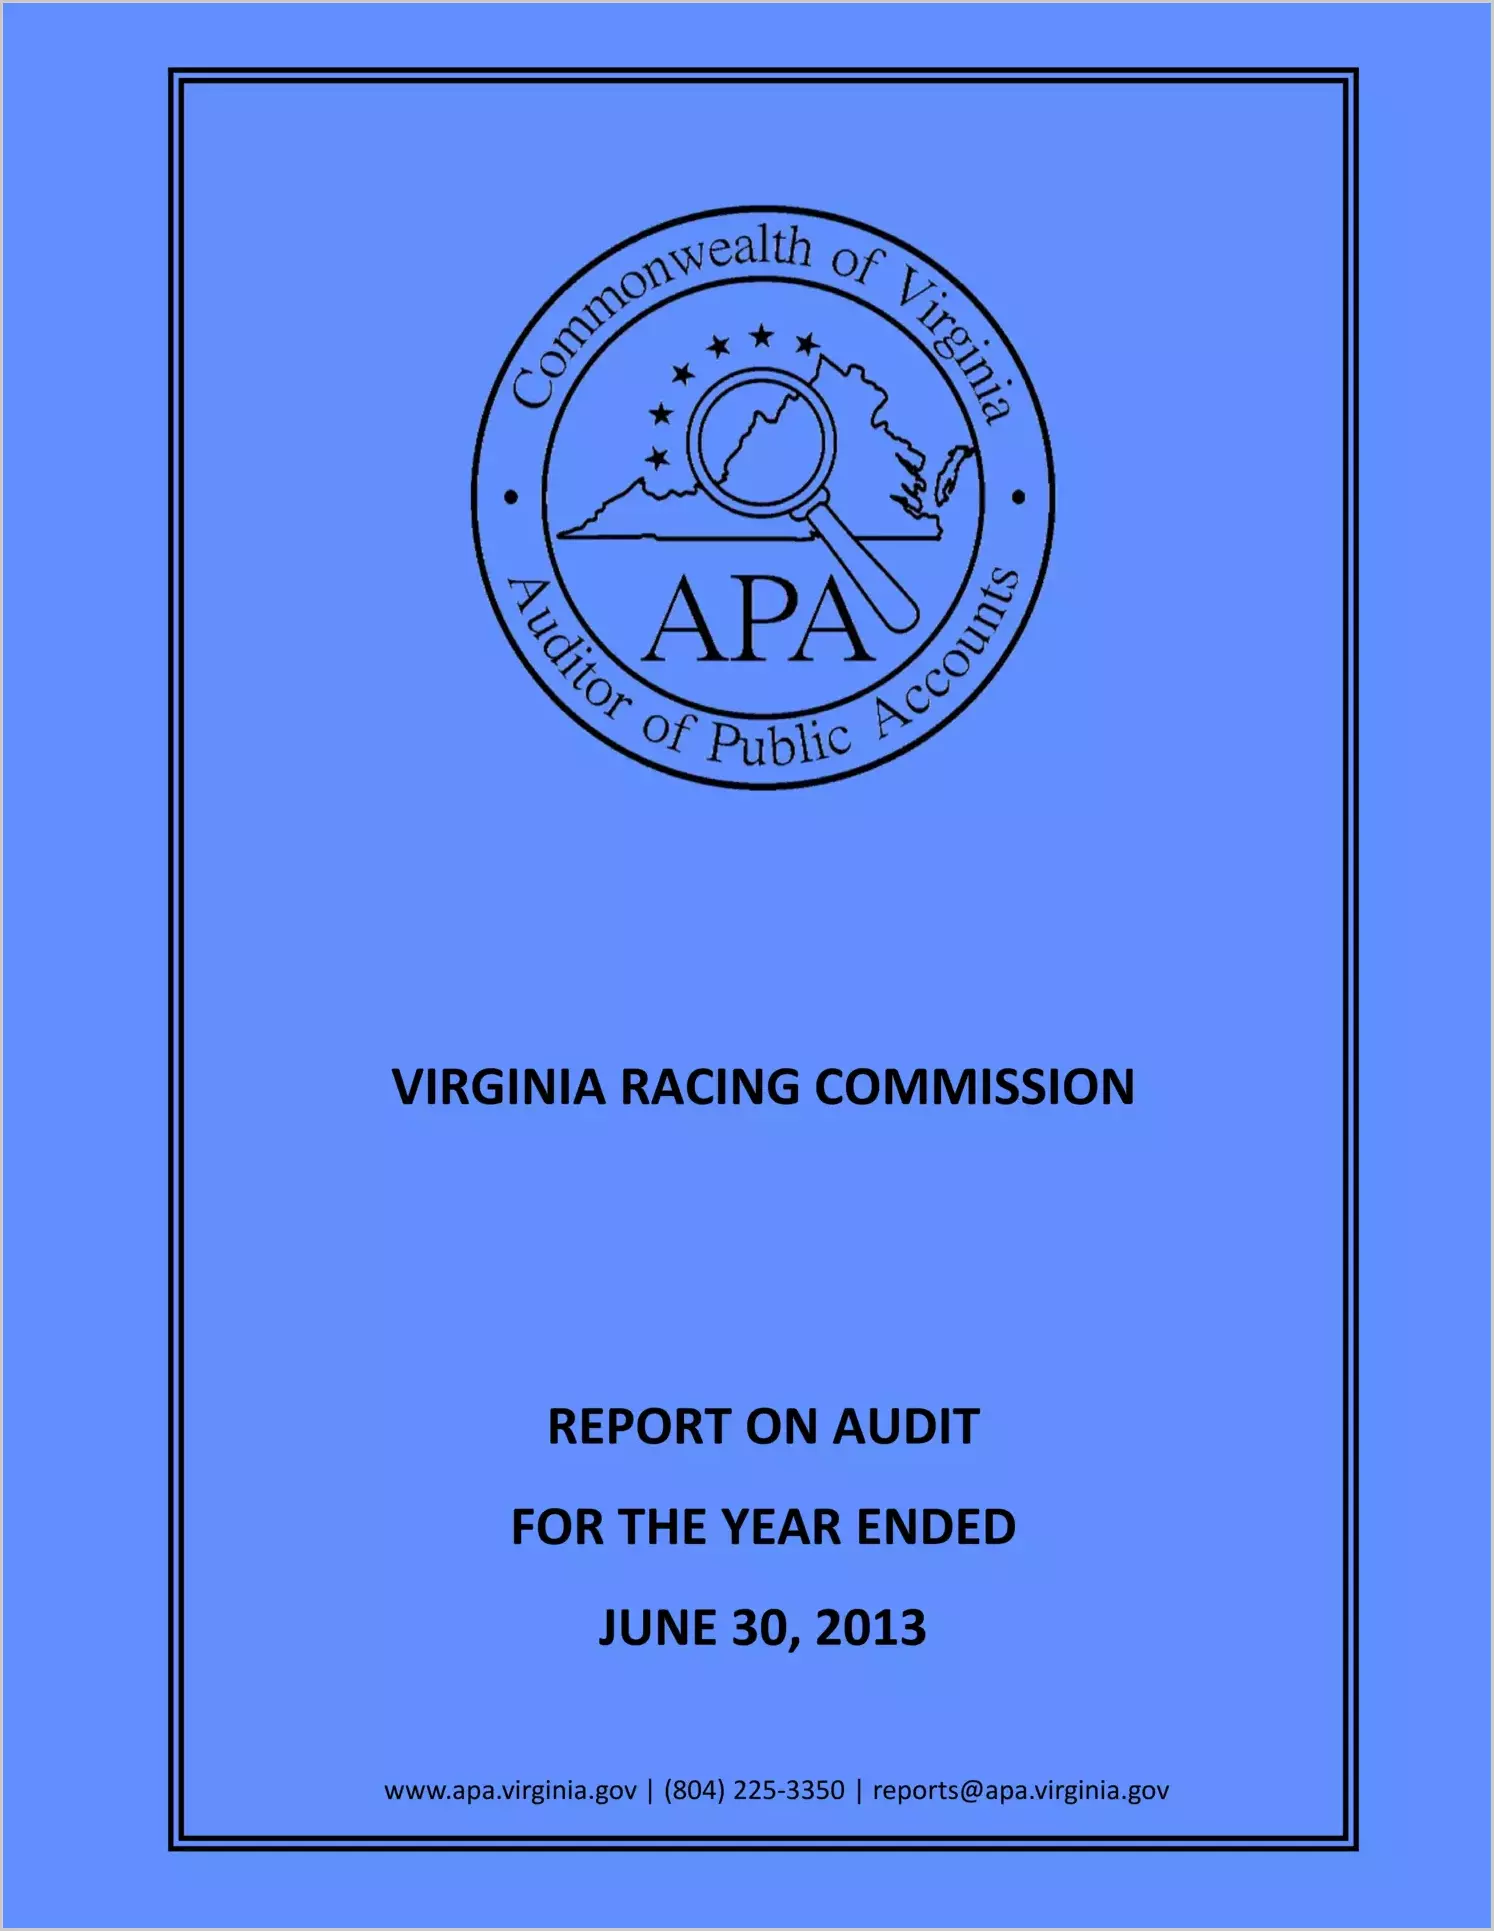 Virginia Racing Commission for the year ended June 30, 2013